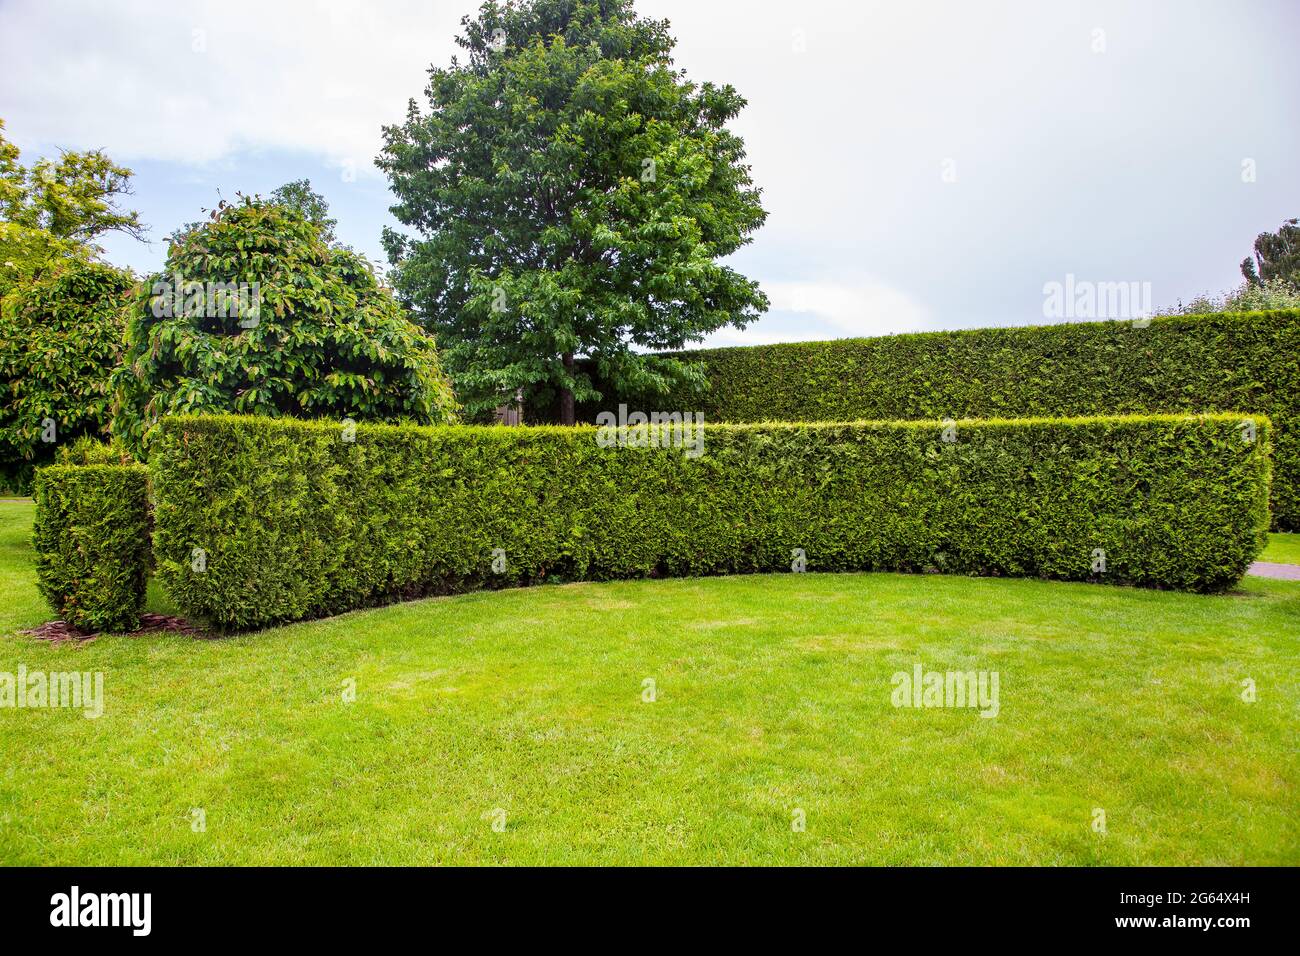 curved thuja hedge in a garden with trees and a green lawn summer backyard landscape, nobody. Stock Photo